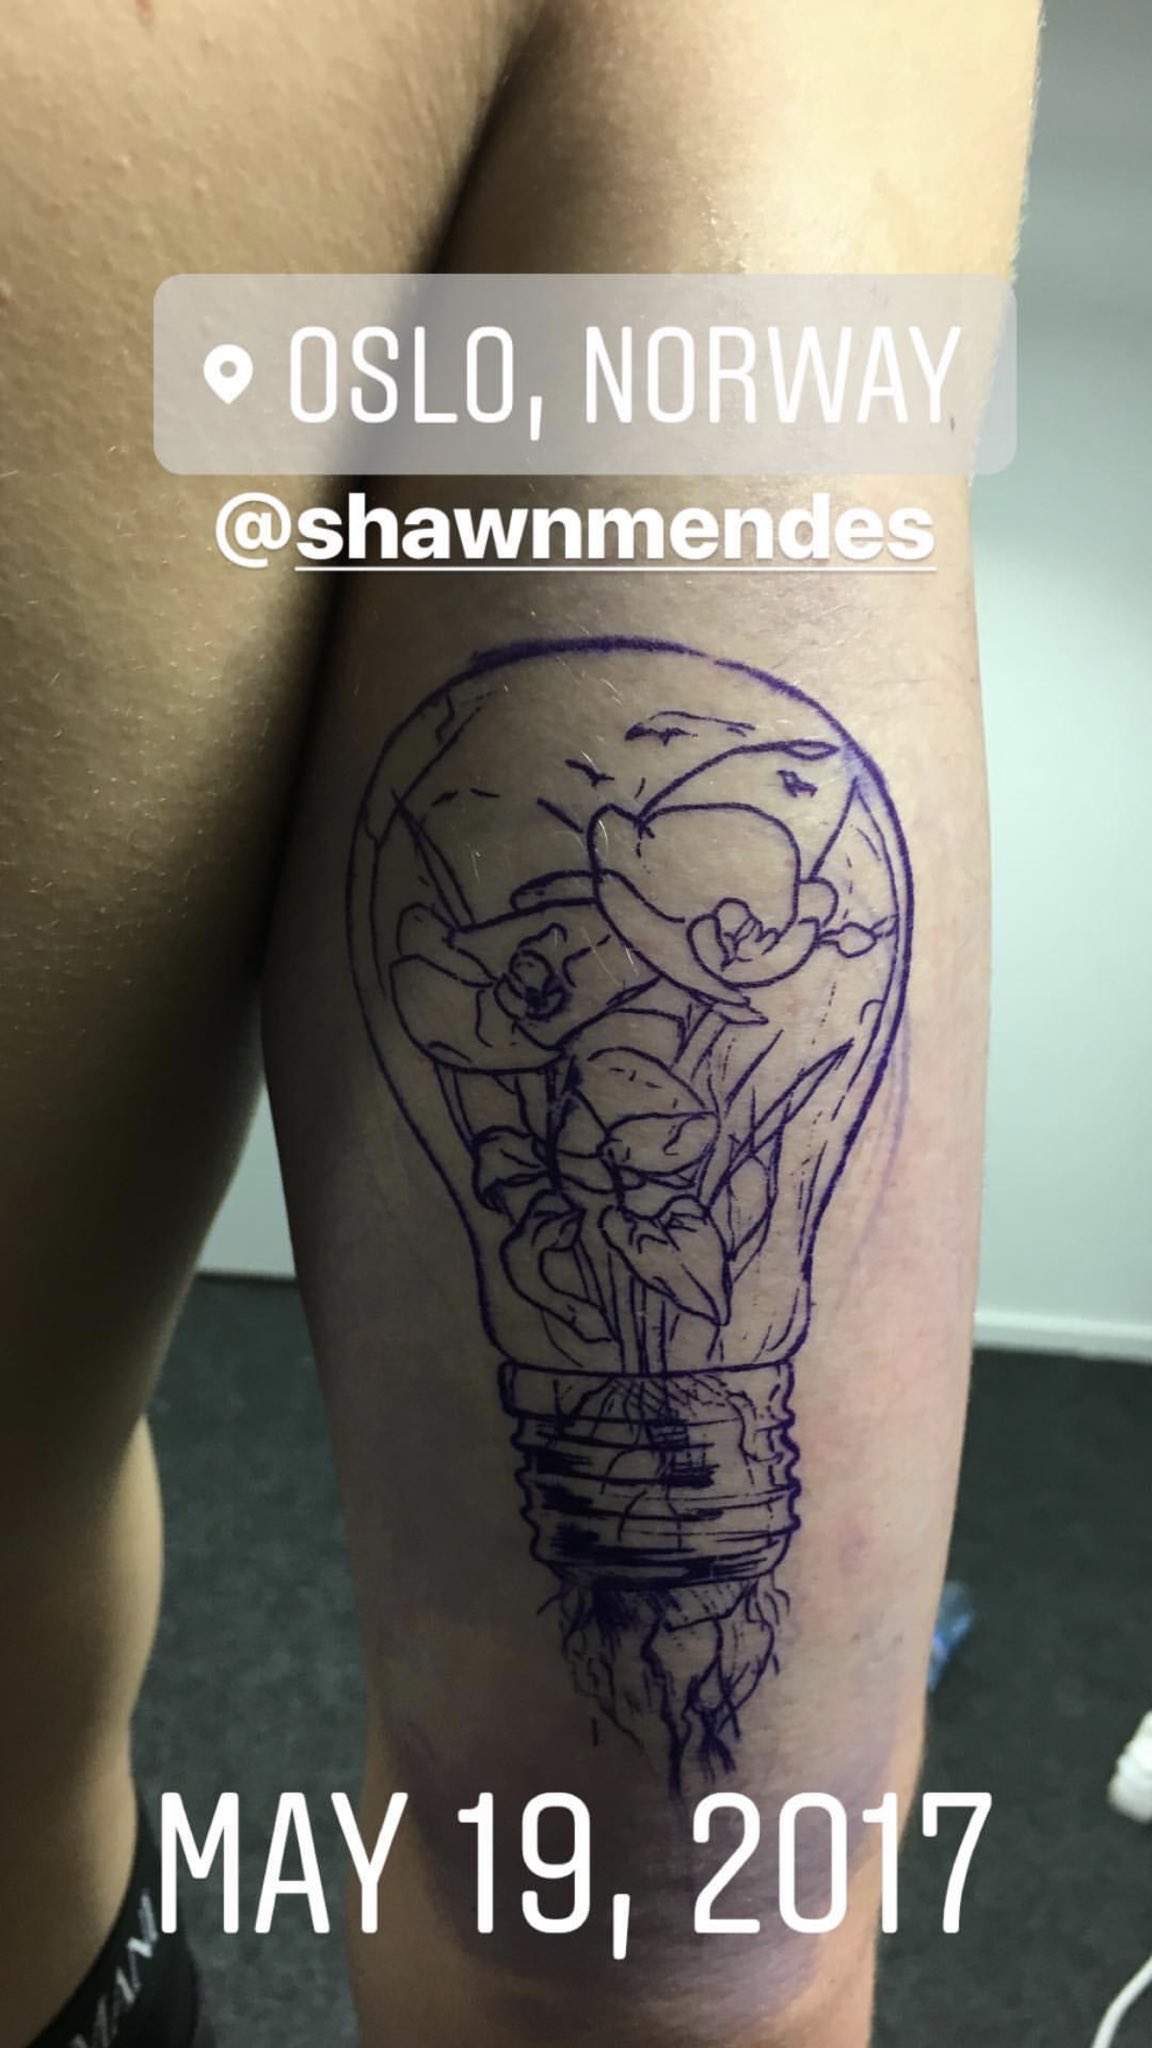 Light bulb tattoo with the filament saying 